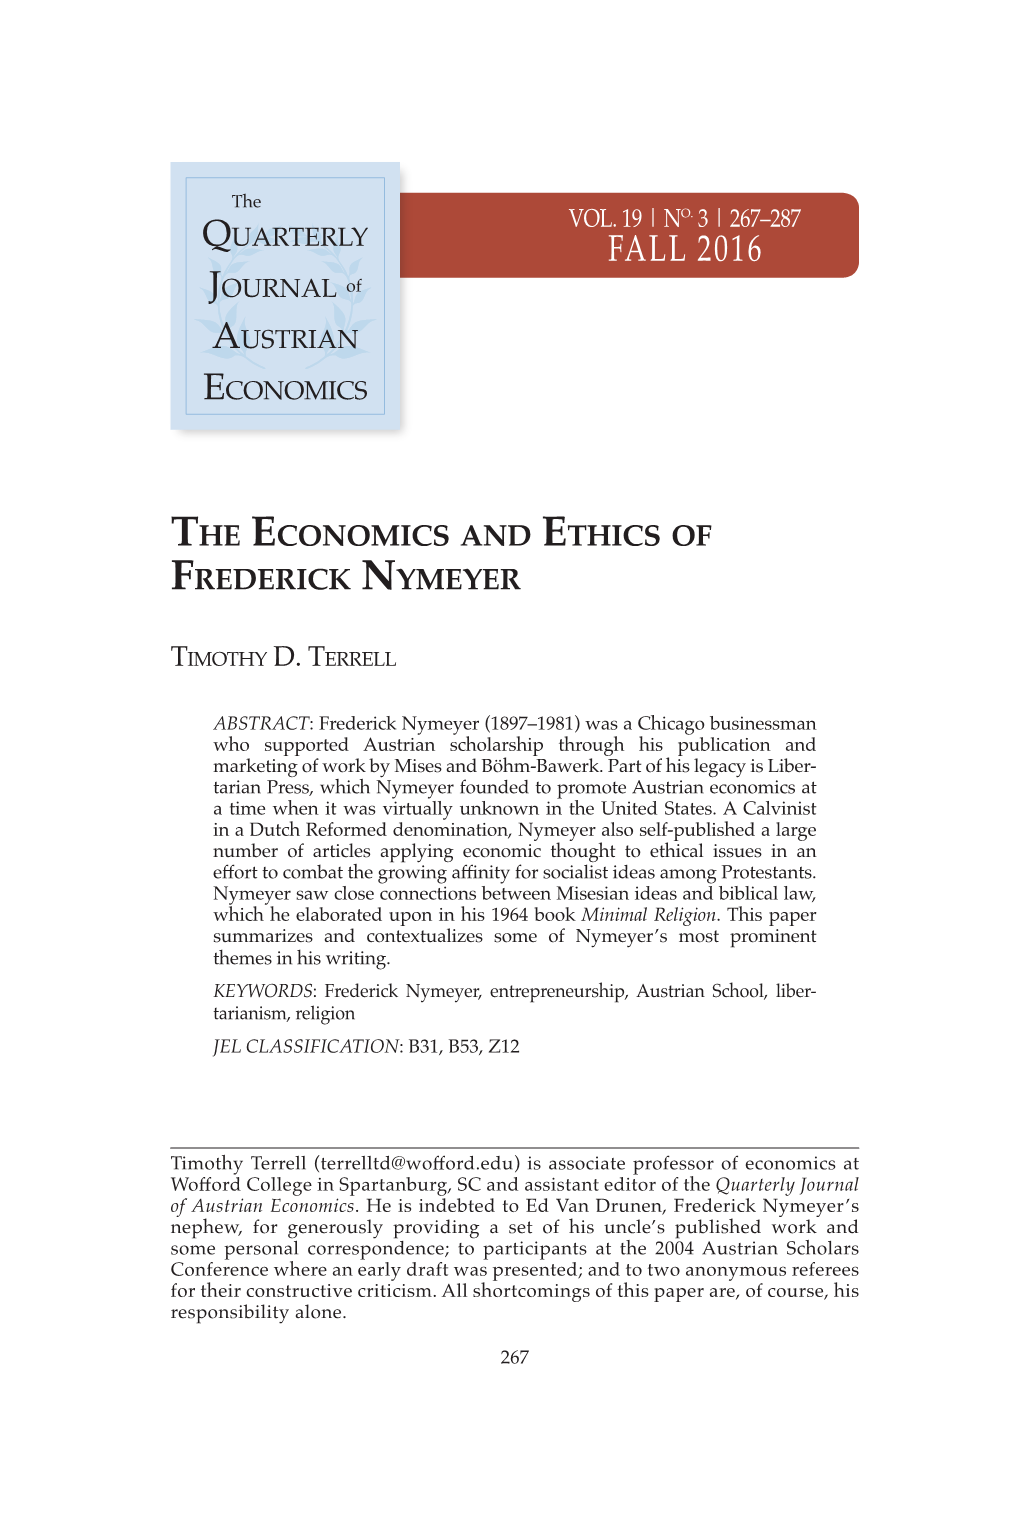 The Economics and Ethics of Frederick Nymeyer